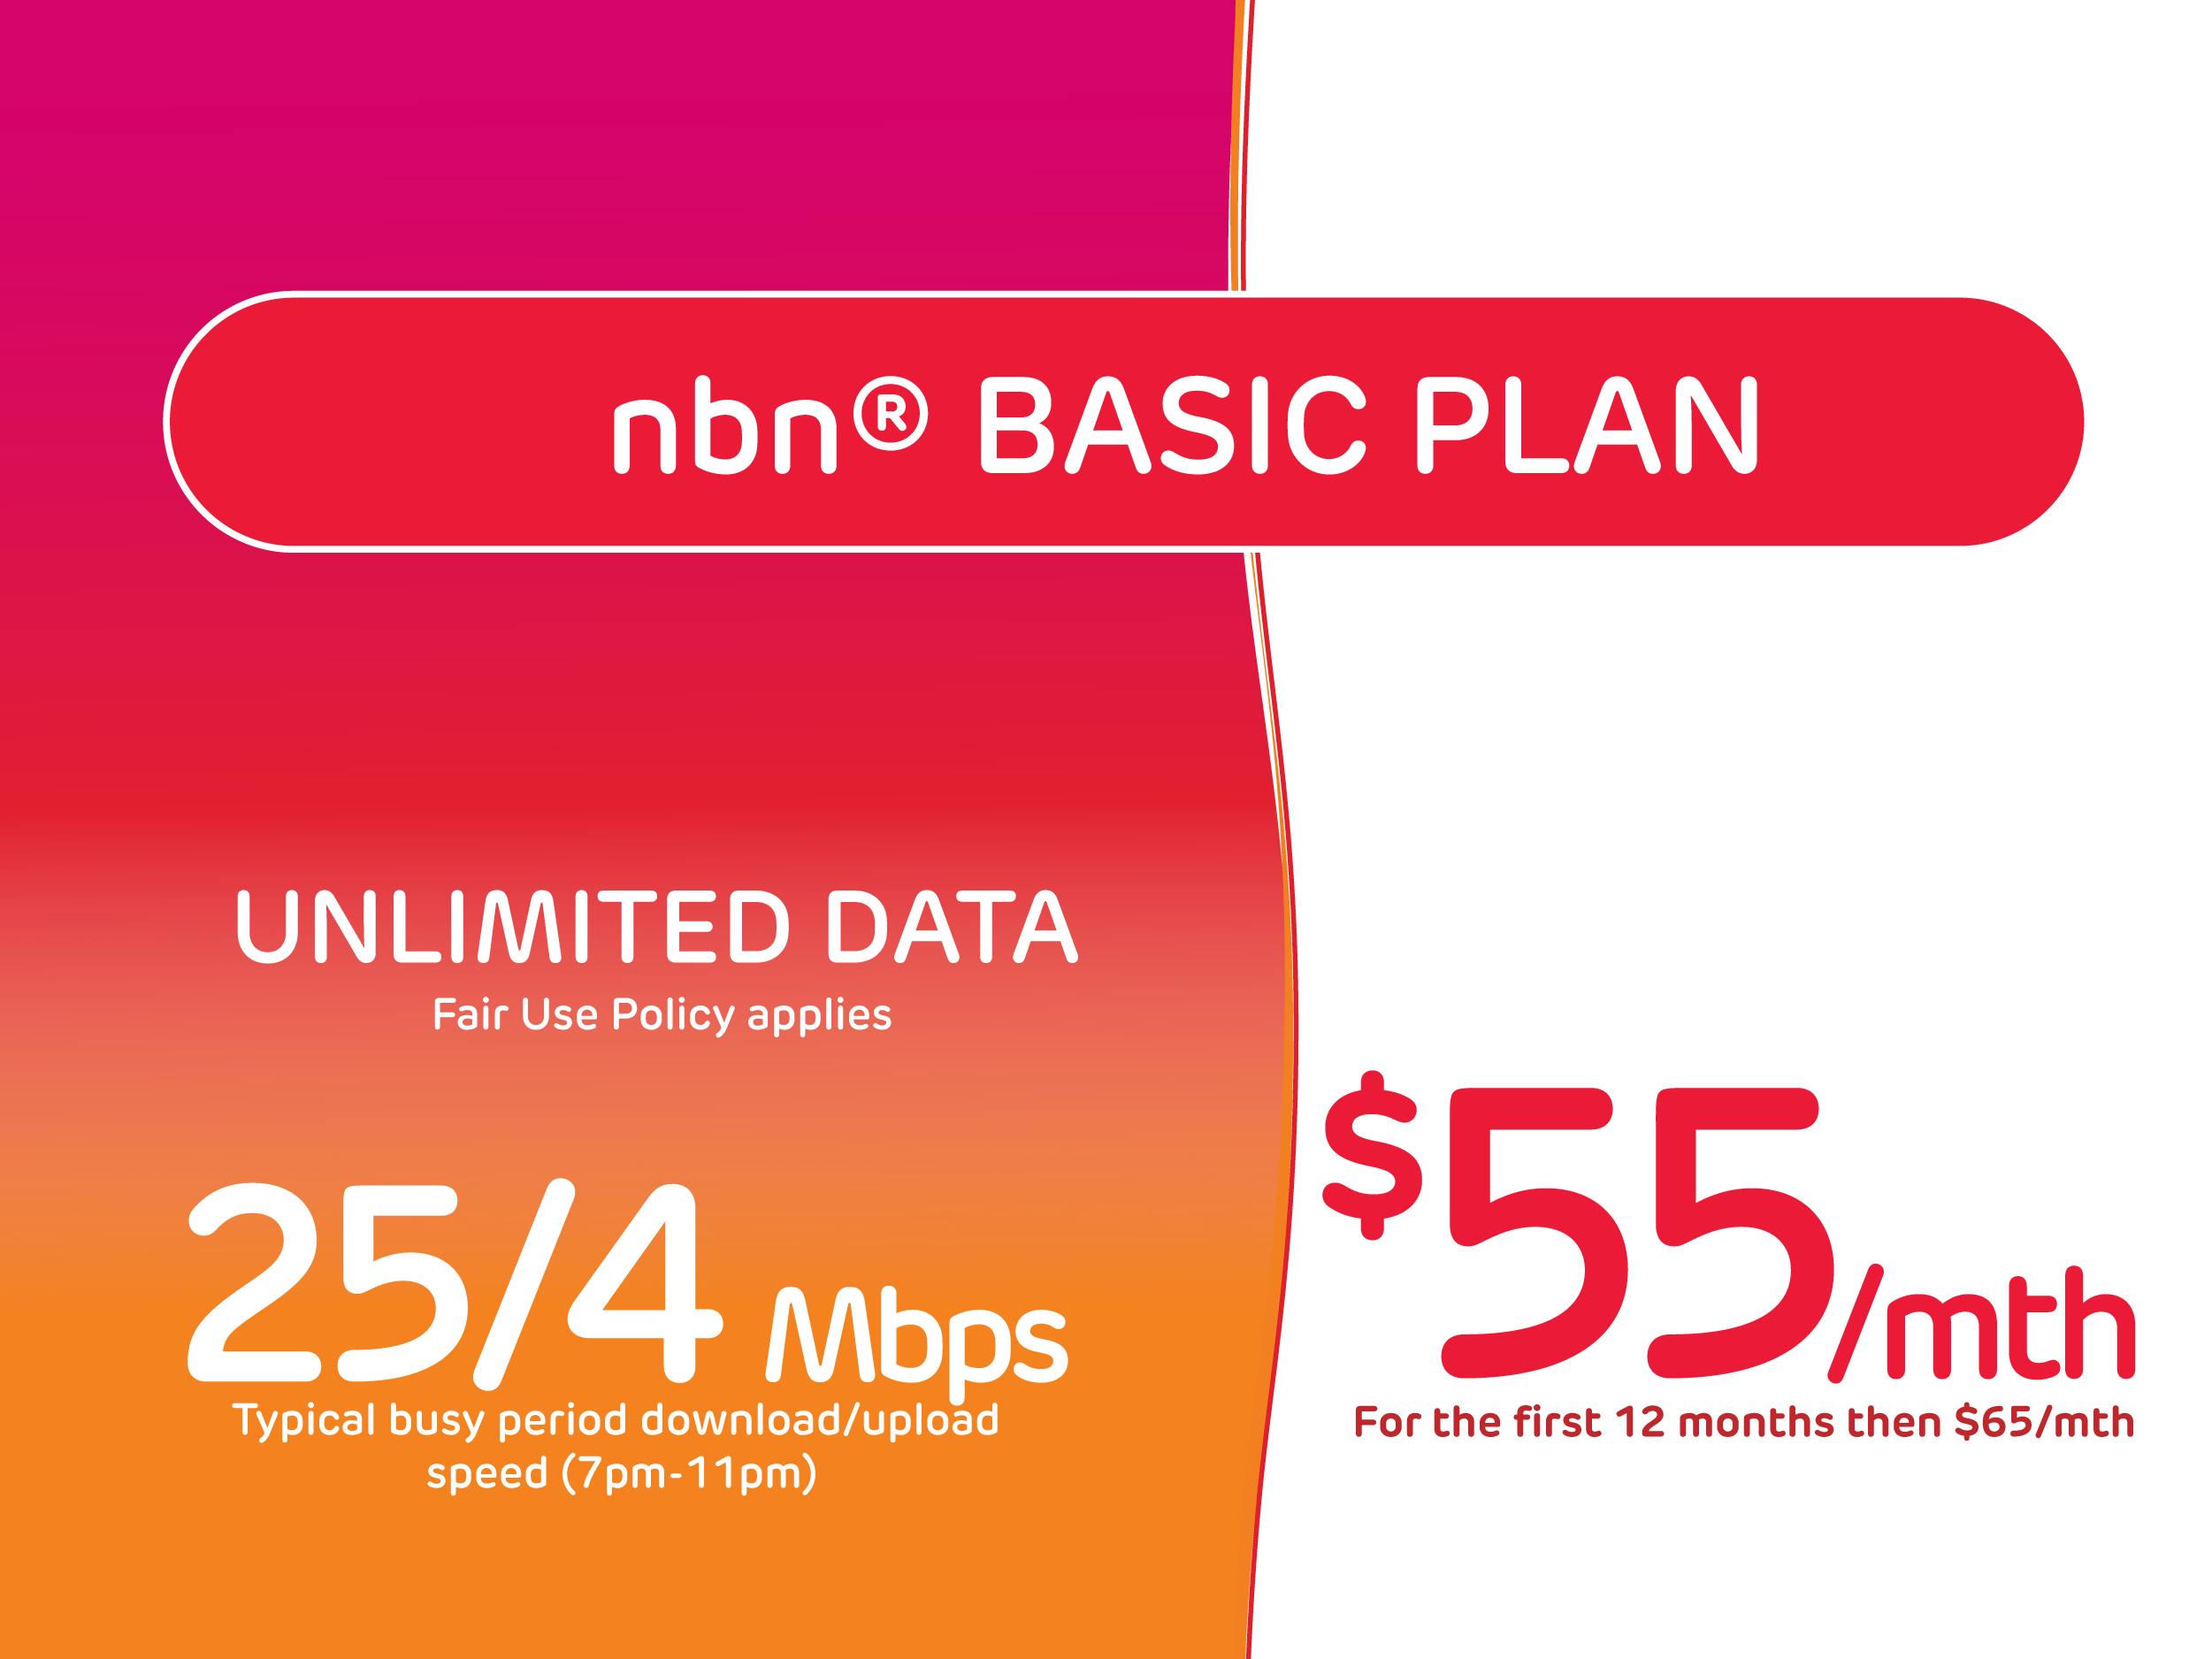 Promotional advertisement for the nbn Basic Plan featuring unlimited data at speeds of 25/4 Mbps during typical busy periods (7pm-11pm). The plan costs $55 per month for the first 12 months, then increases to $65 per month. The ad uses a vibrant gradient background transitioning from pink to orange with bold, clear text highlighting the plan details.